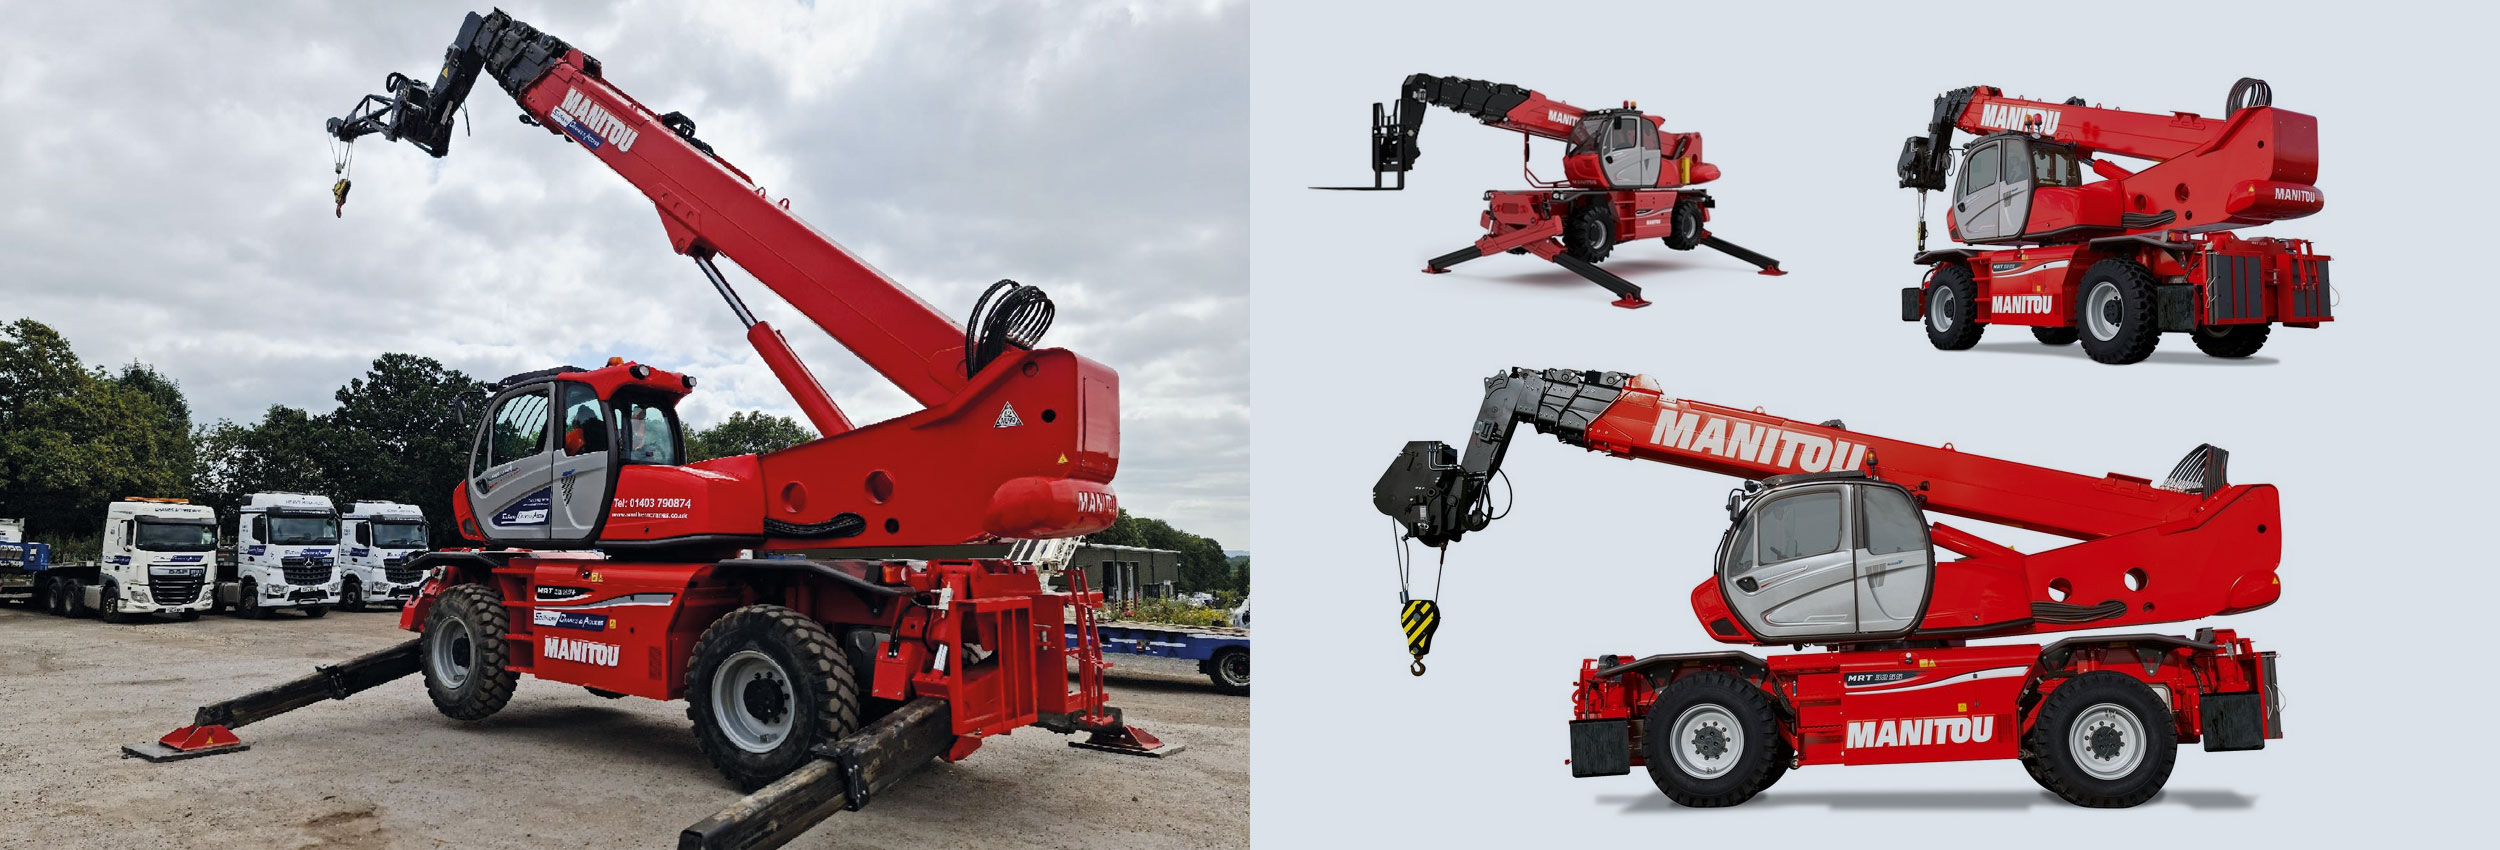 Rotating Telehandlers, Roto Telehandlers for hire at Southern Cranes & Access, West Sussex